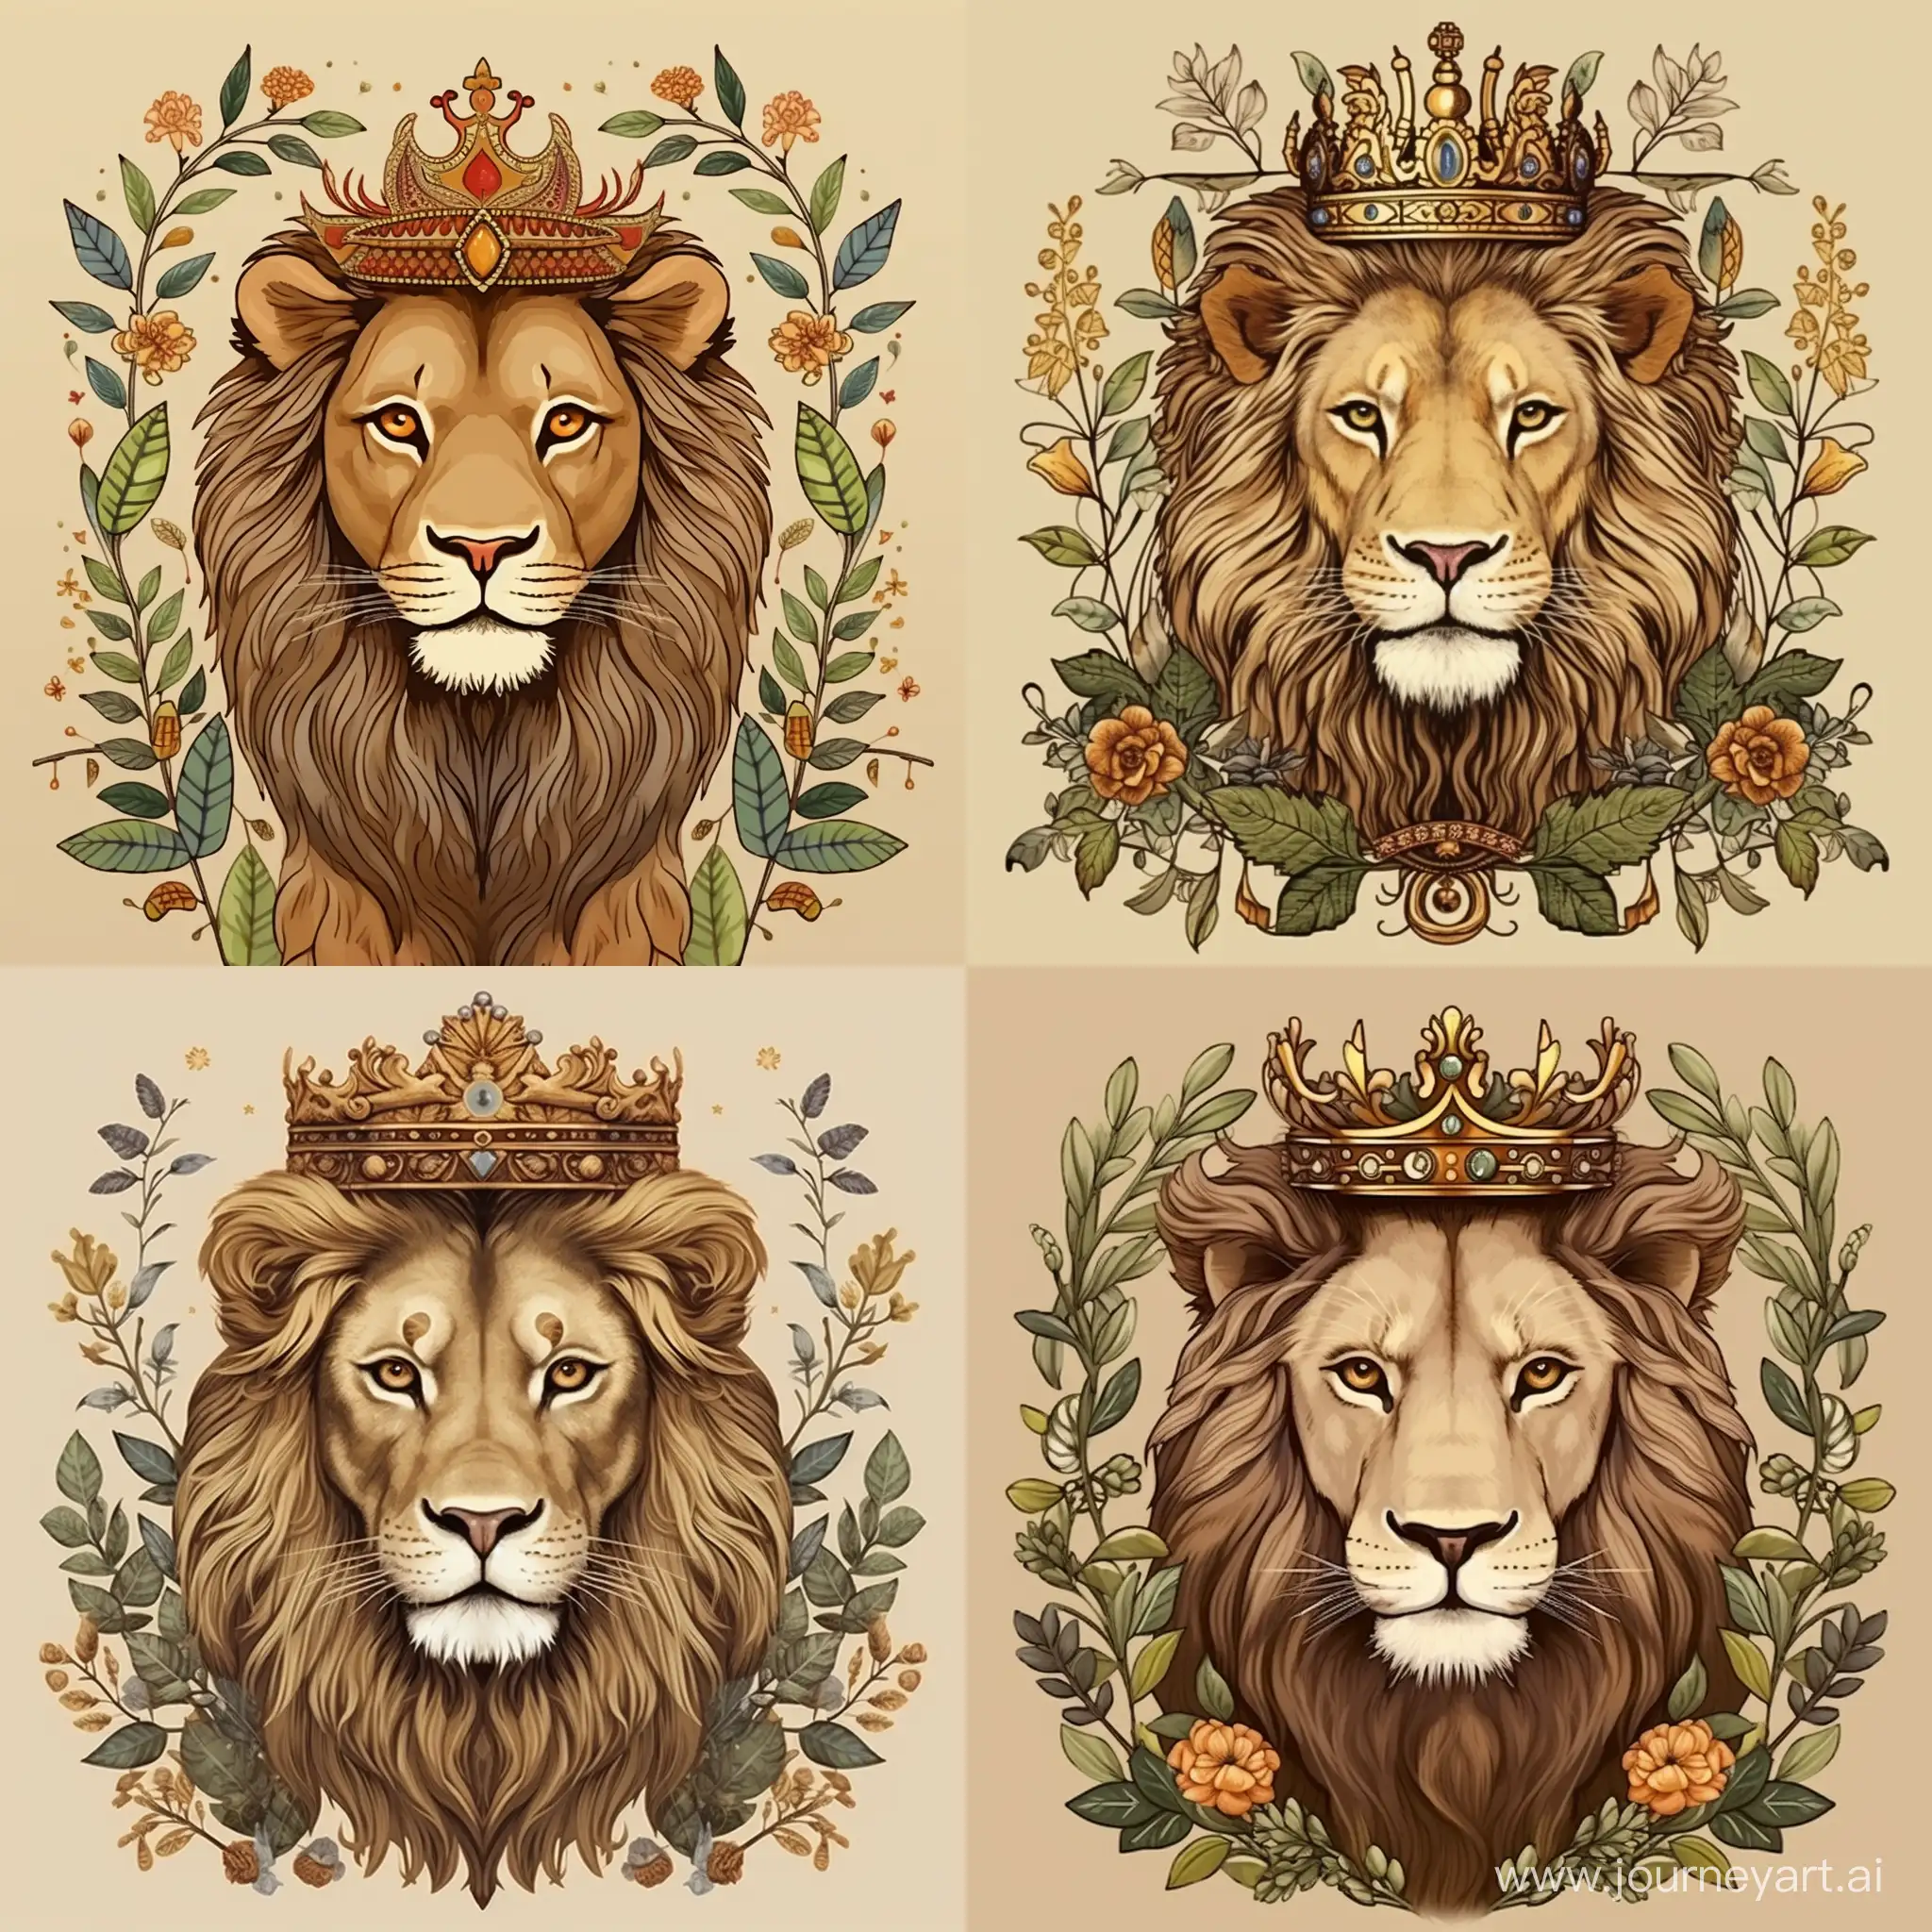 Three-quarter-length portrait of a lion, crown on his head, cartoon style, caricature, on a beige background, pattern of savannah plants, in the style of James Christensen